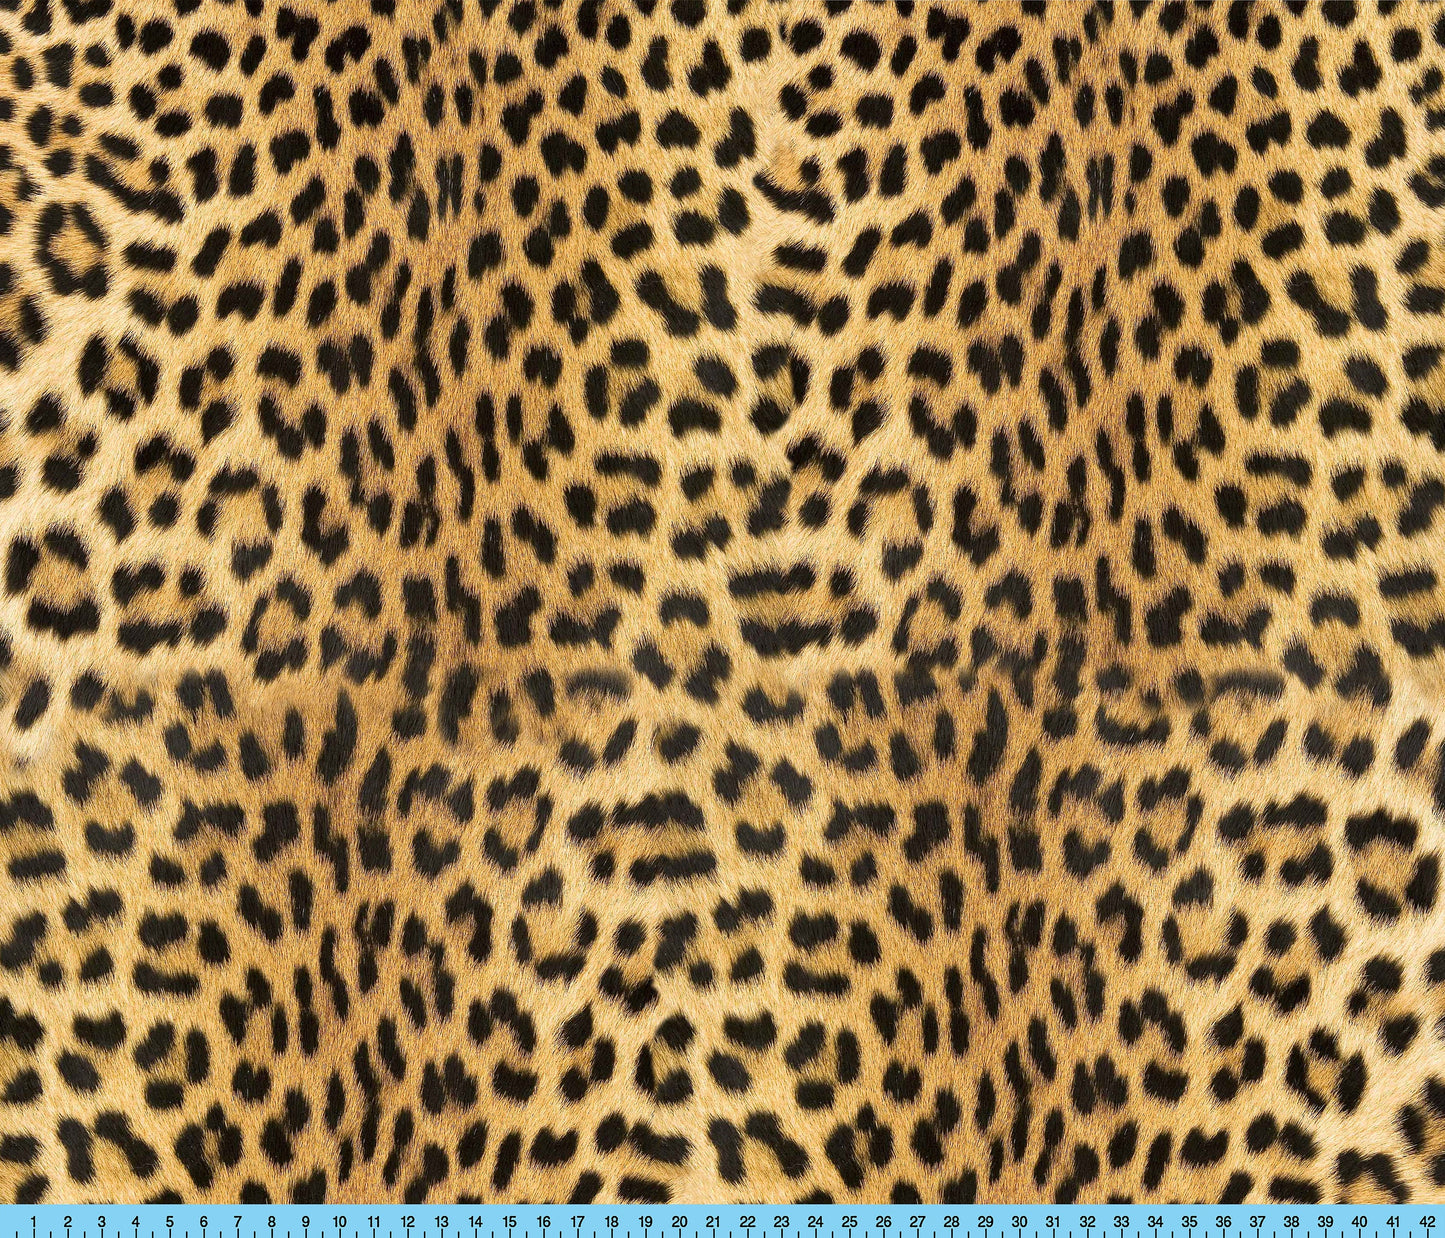 Leopard Print Fabric By The Yard